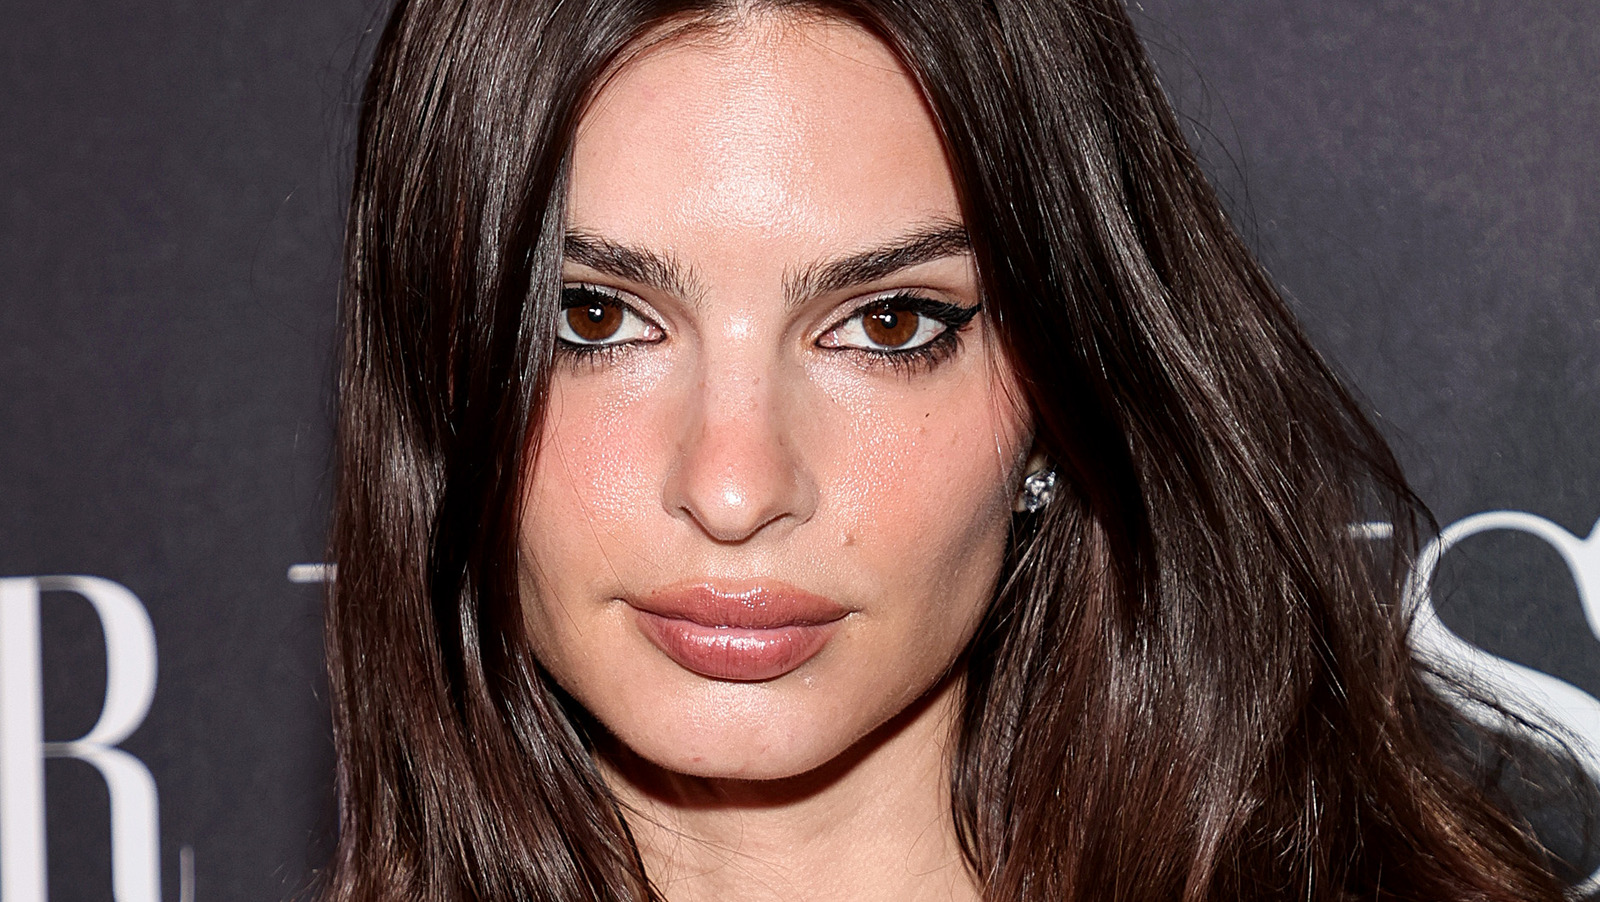 Emily Ratajkowski reveals the emotional reason behind her weight loss